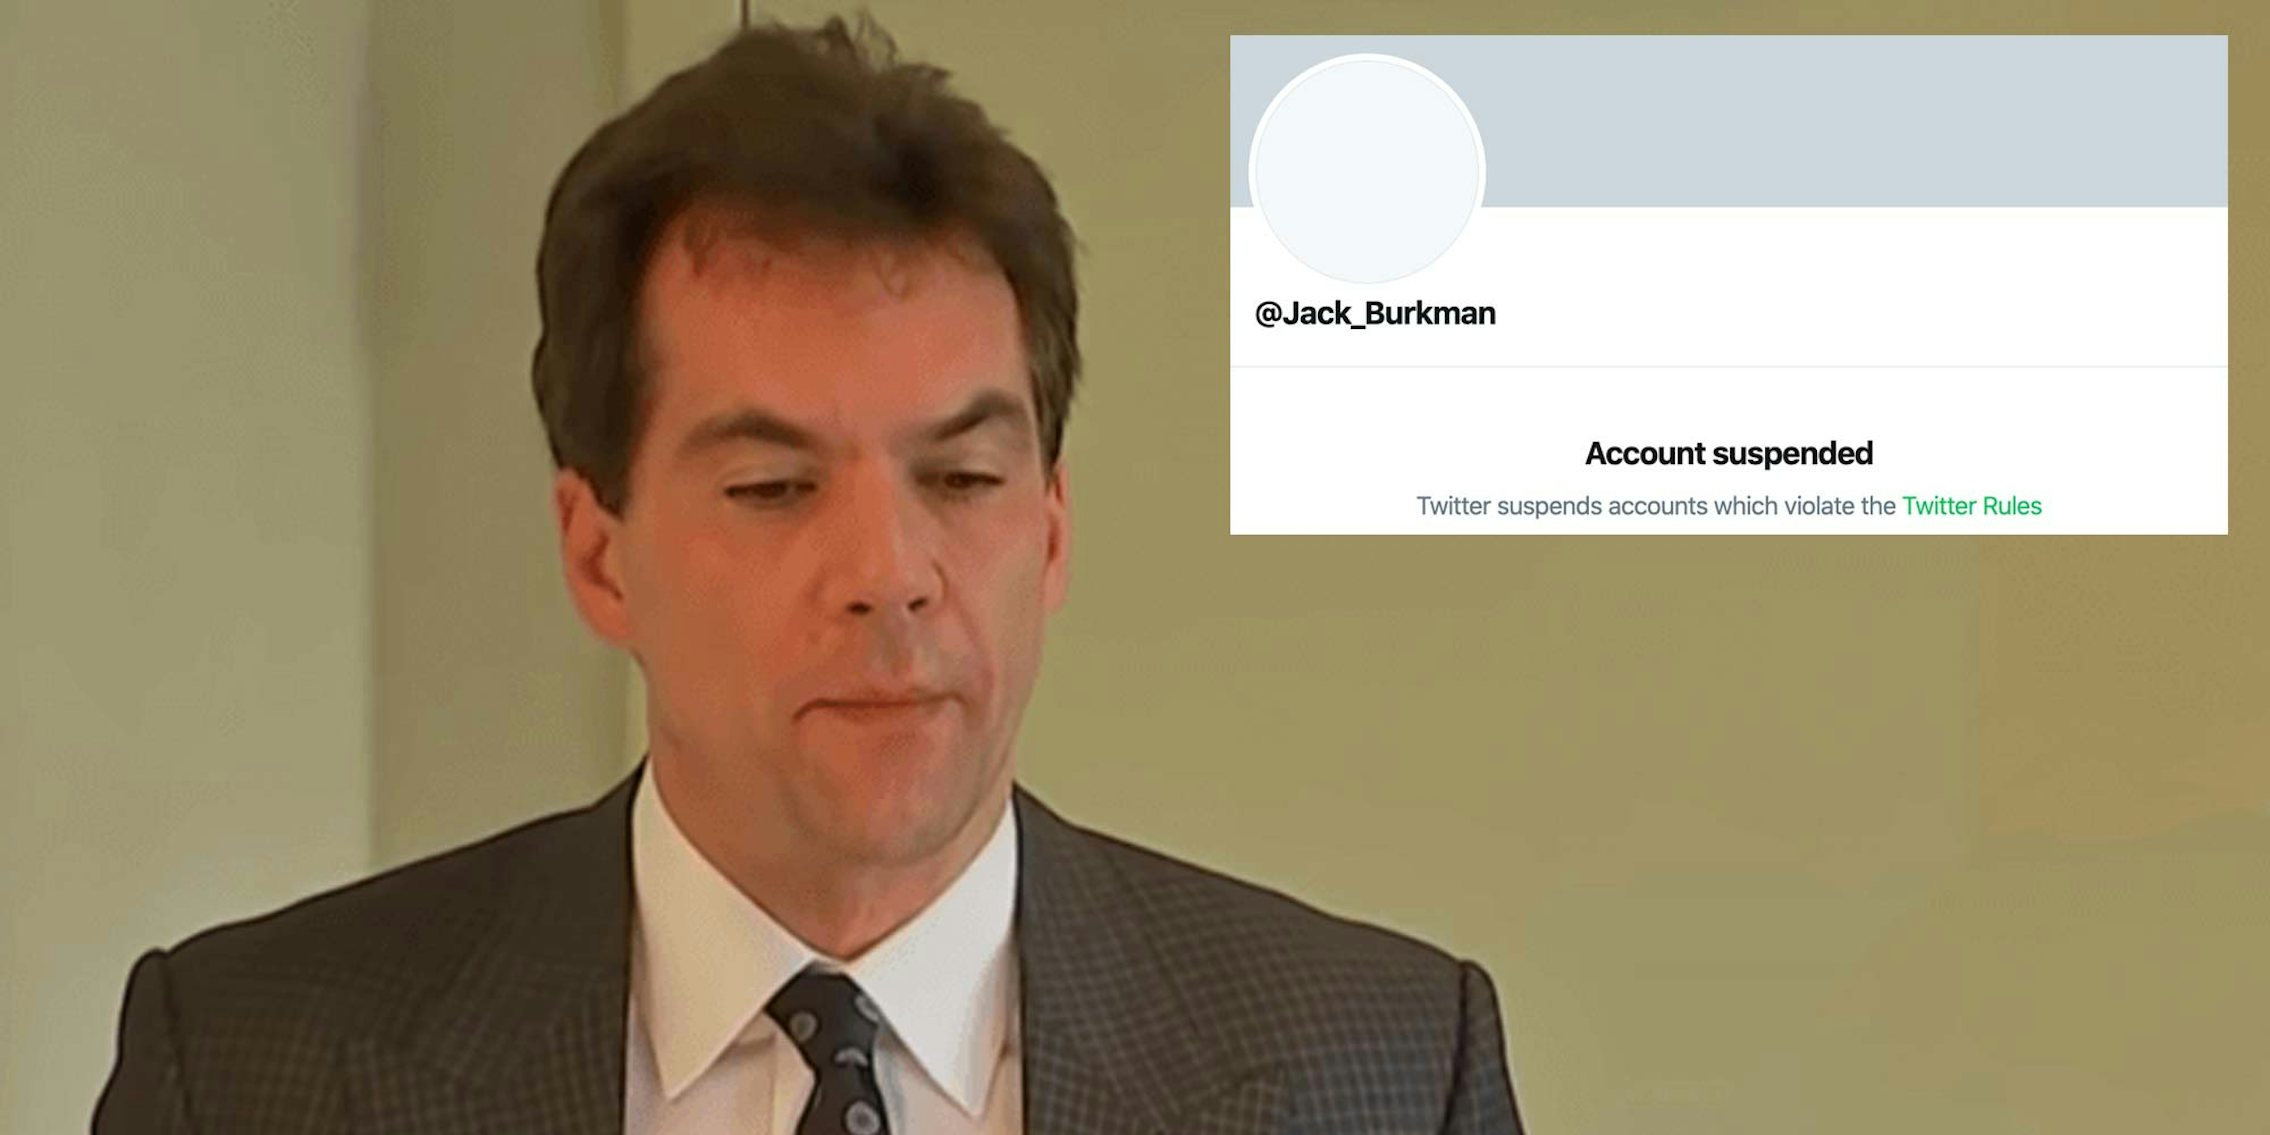 Jack Burkman next to his suspended Twitter account